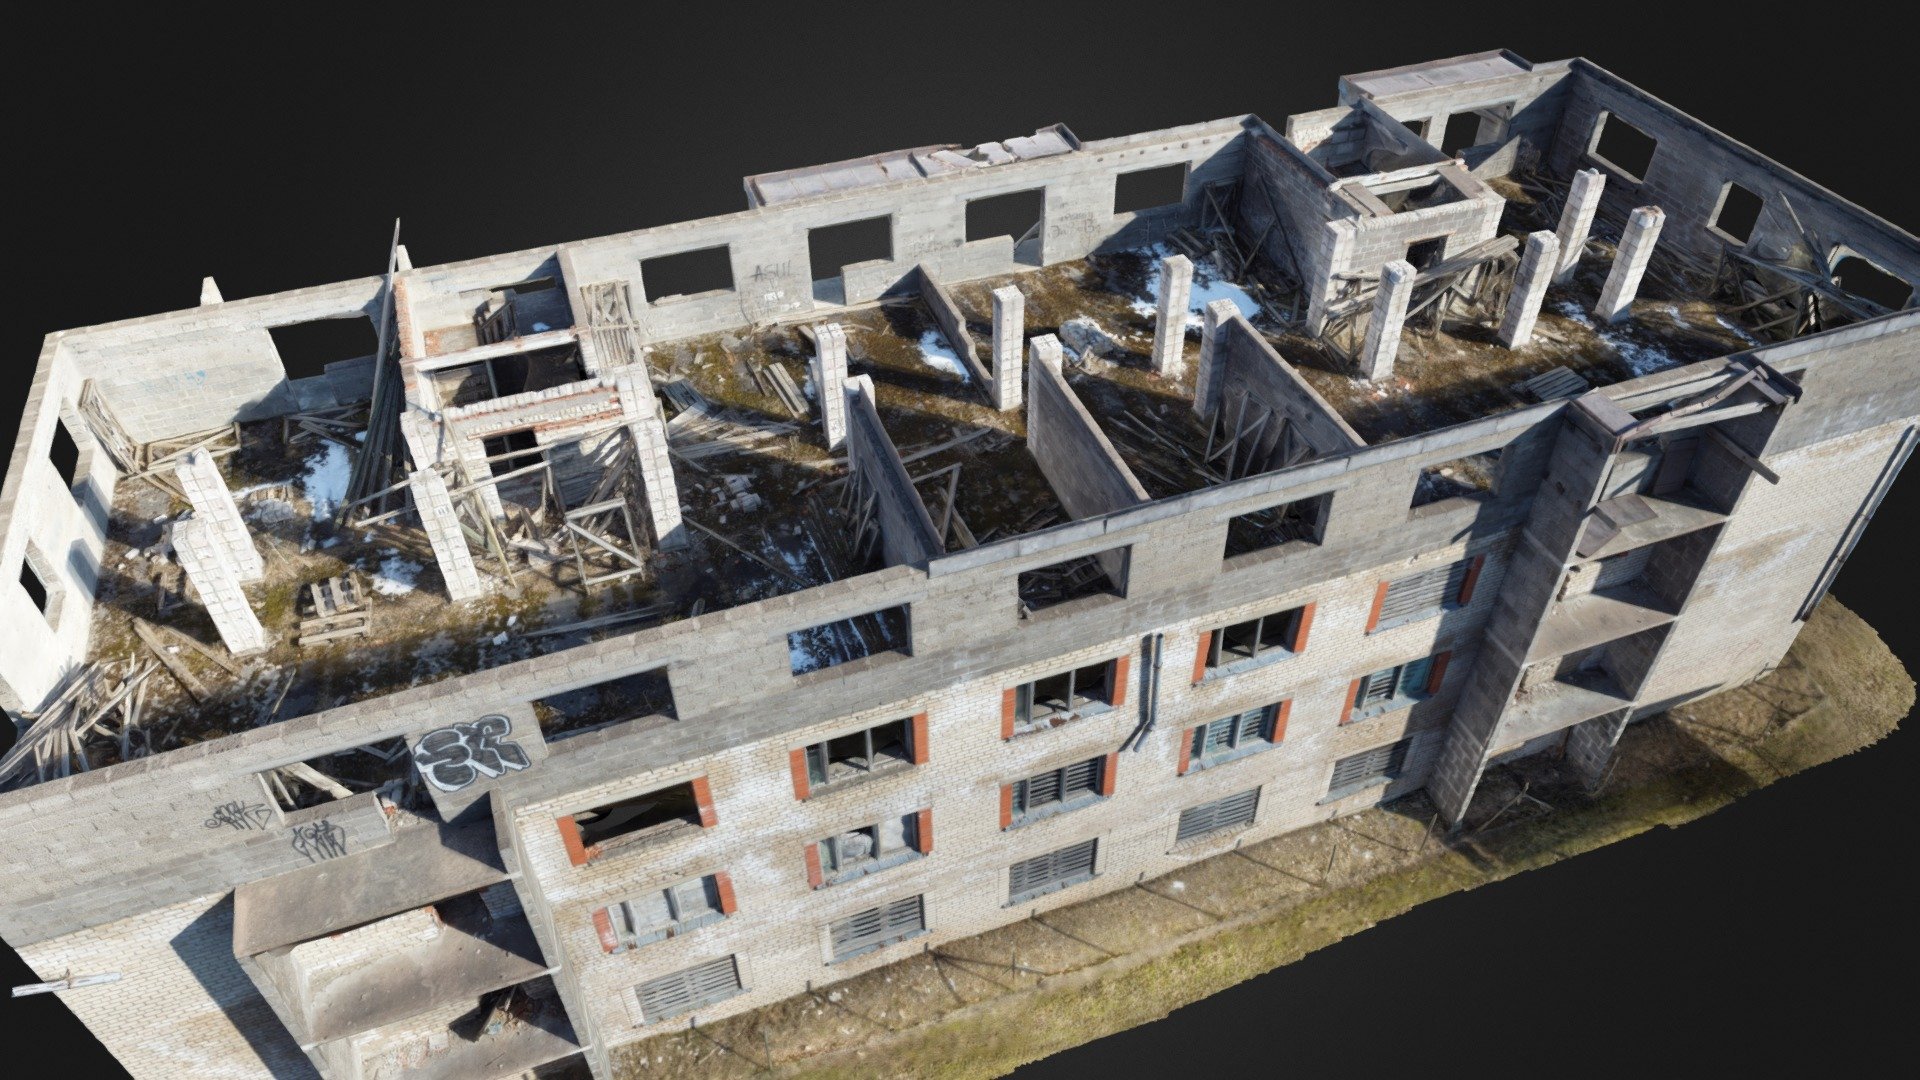 3D scan of an abandoned apartment complex without a roof.
Unfinished 4th floor.
4 story high.
With normal map 3d model